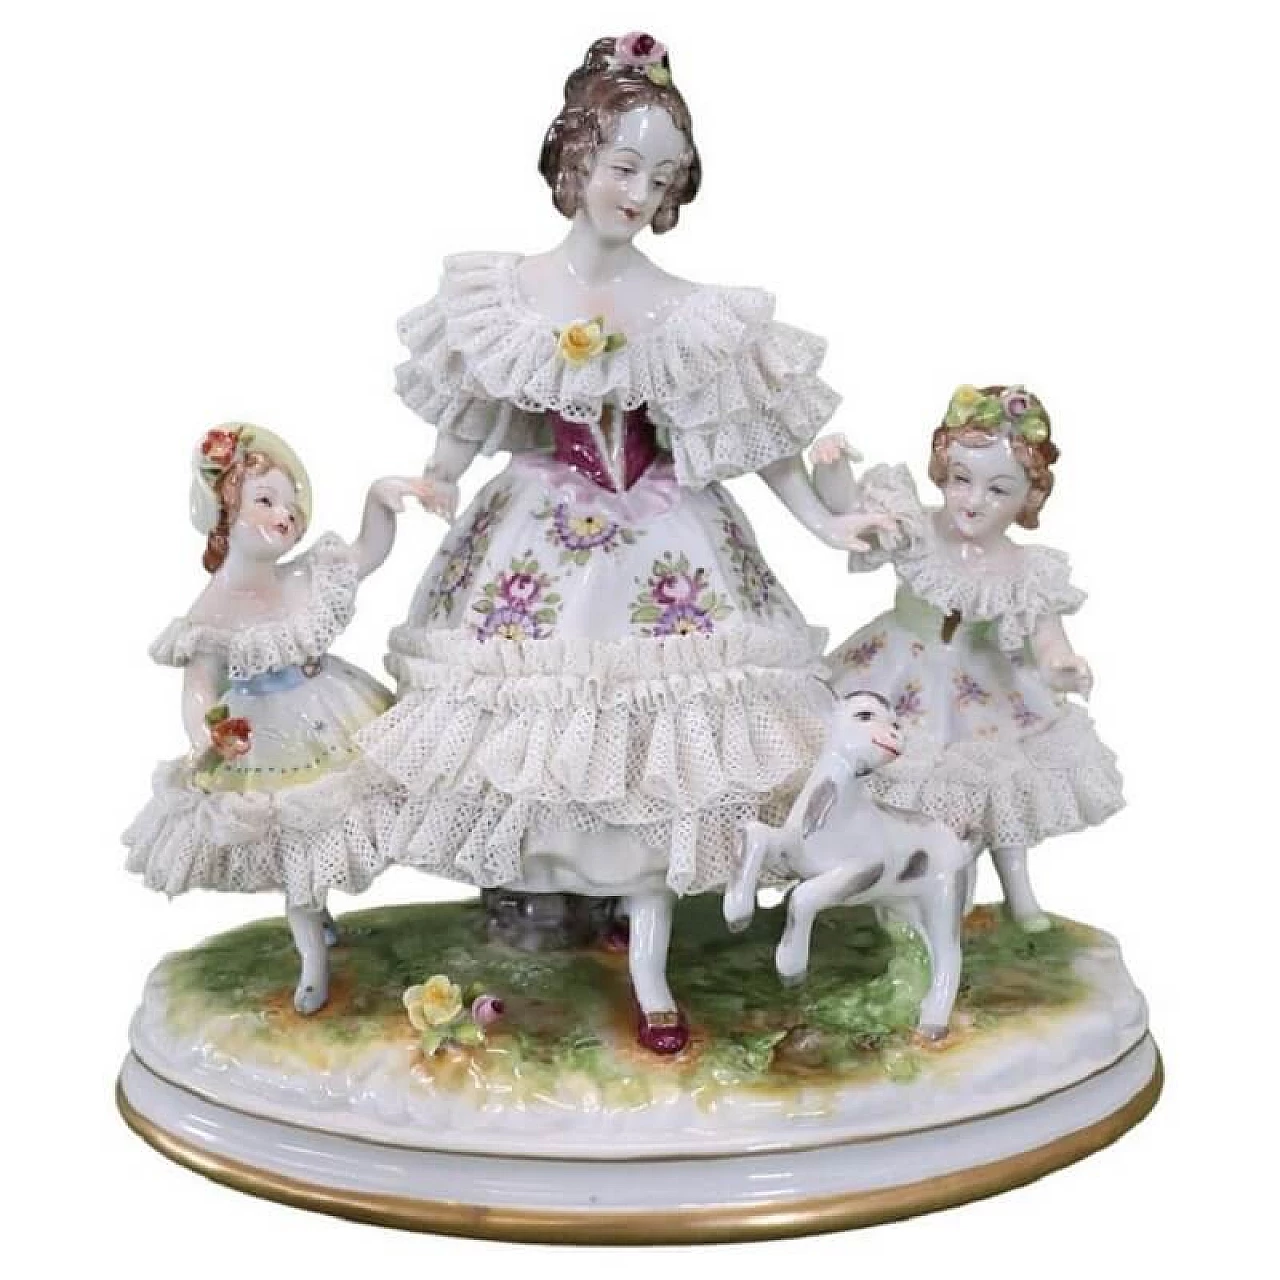 Capodimonte porcelain sculpture of woman, little girls and fawn, 19th century 1